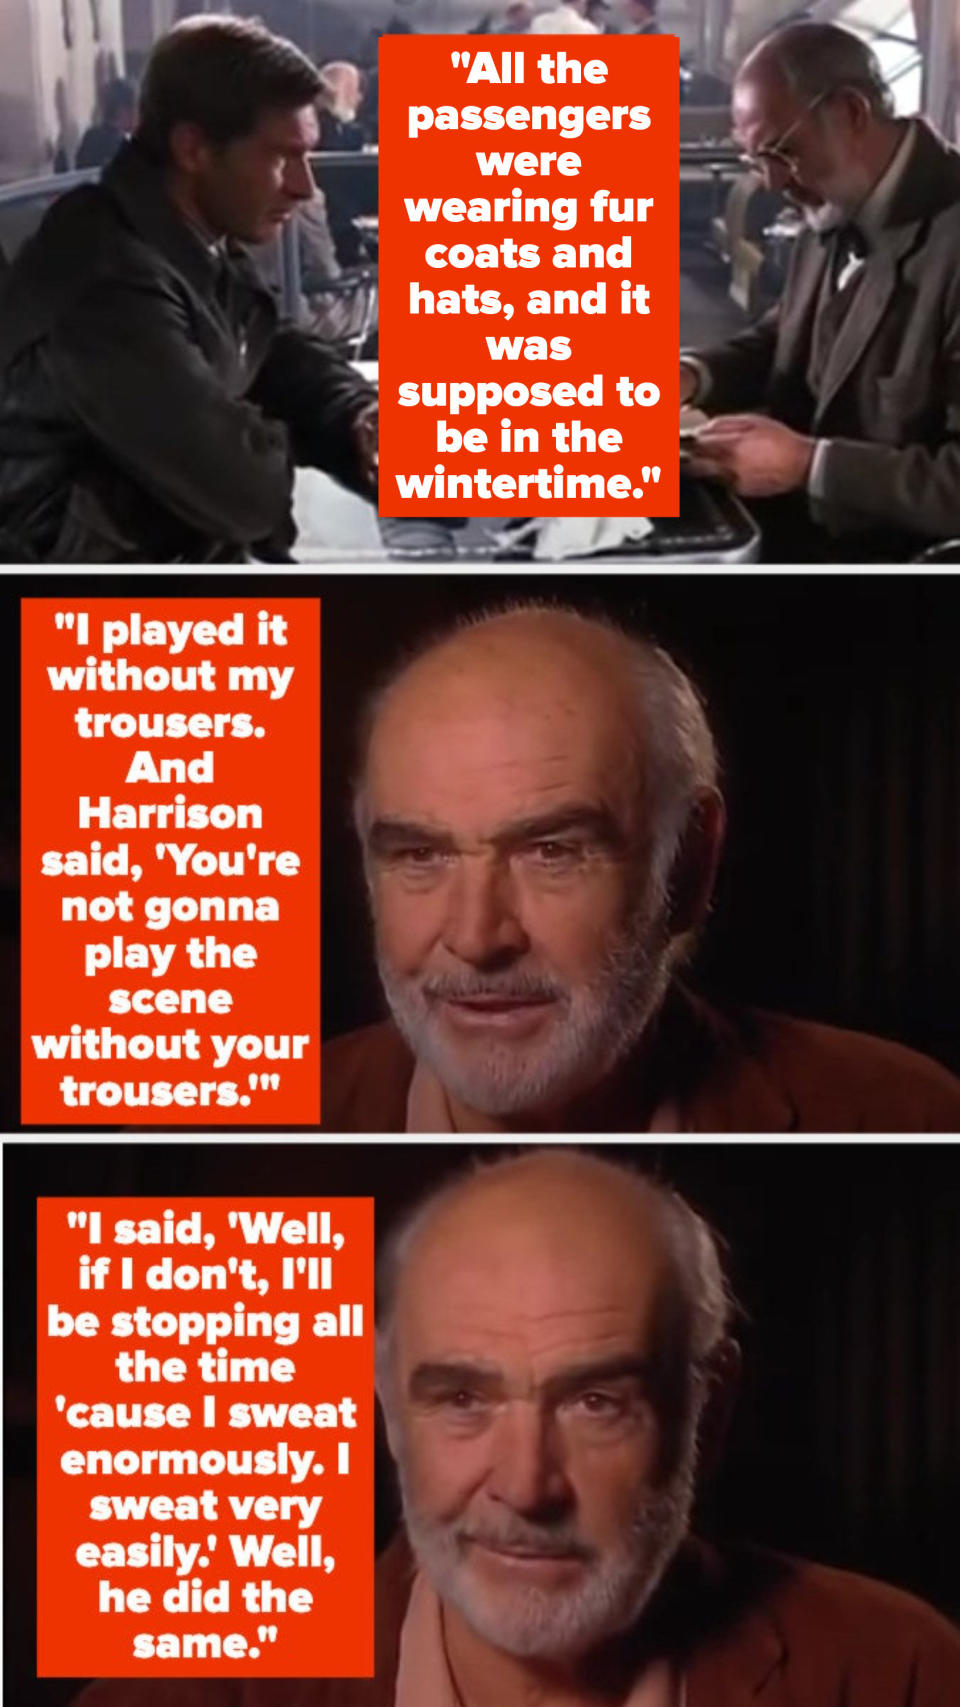 Sean Connery talking about having his pants off in a hot scene and Harrison Ford being surprised, but then taking his pants off too